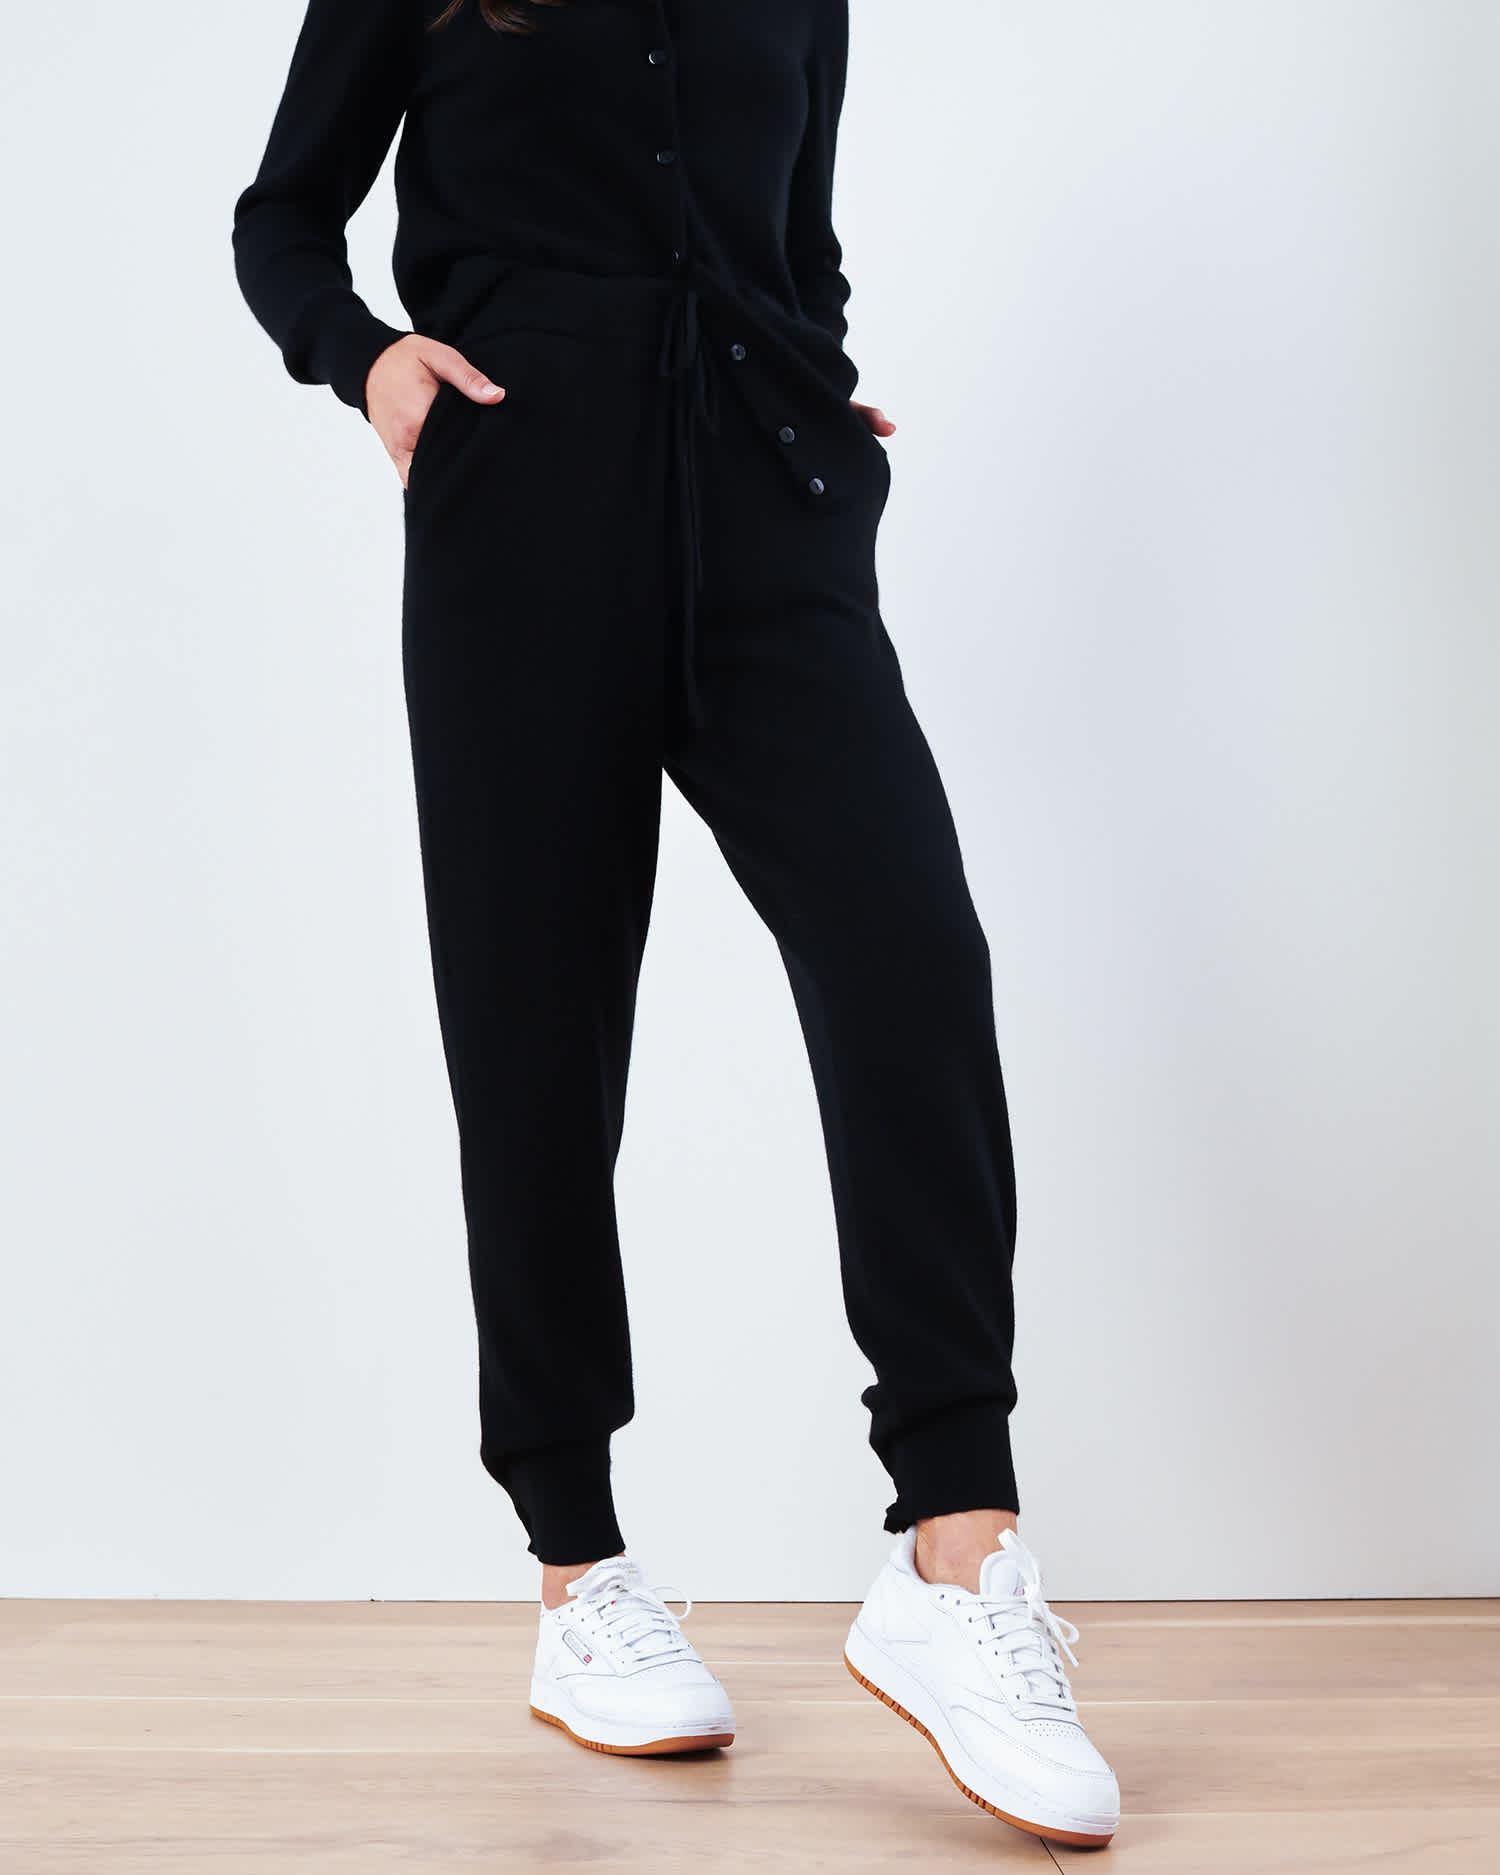 Woman wearing black cashmere sweatpants & cashmere joggers with white sneakers